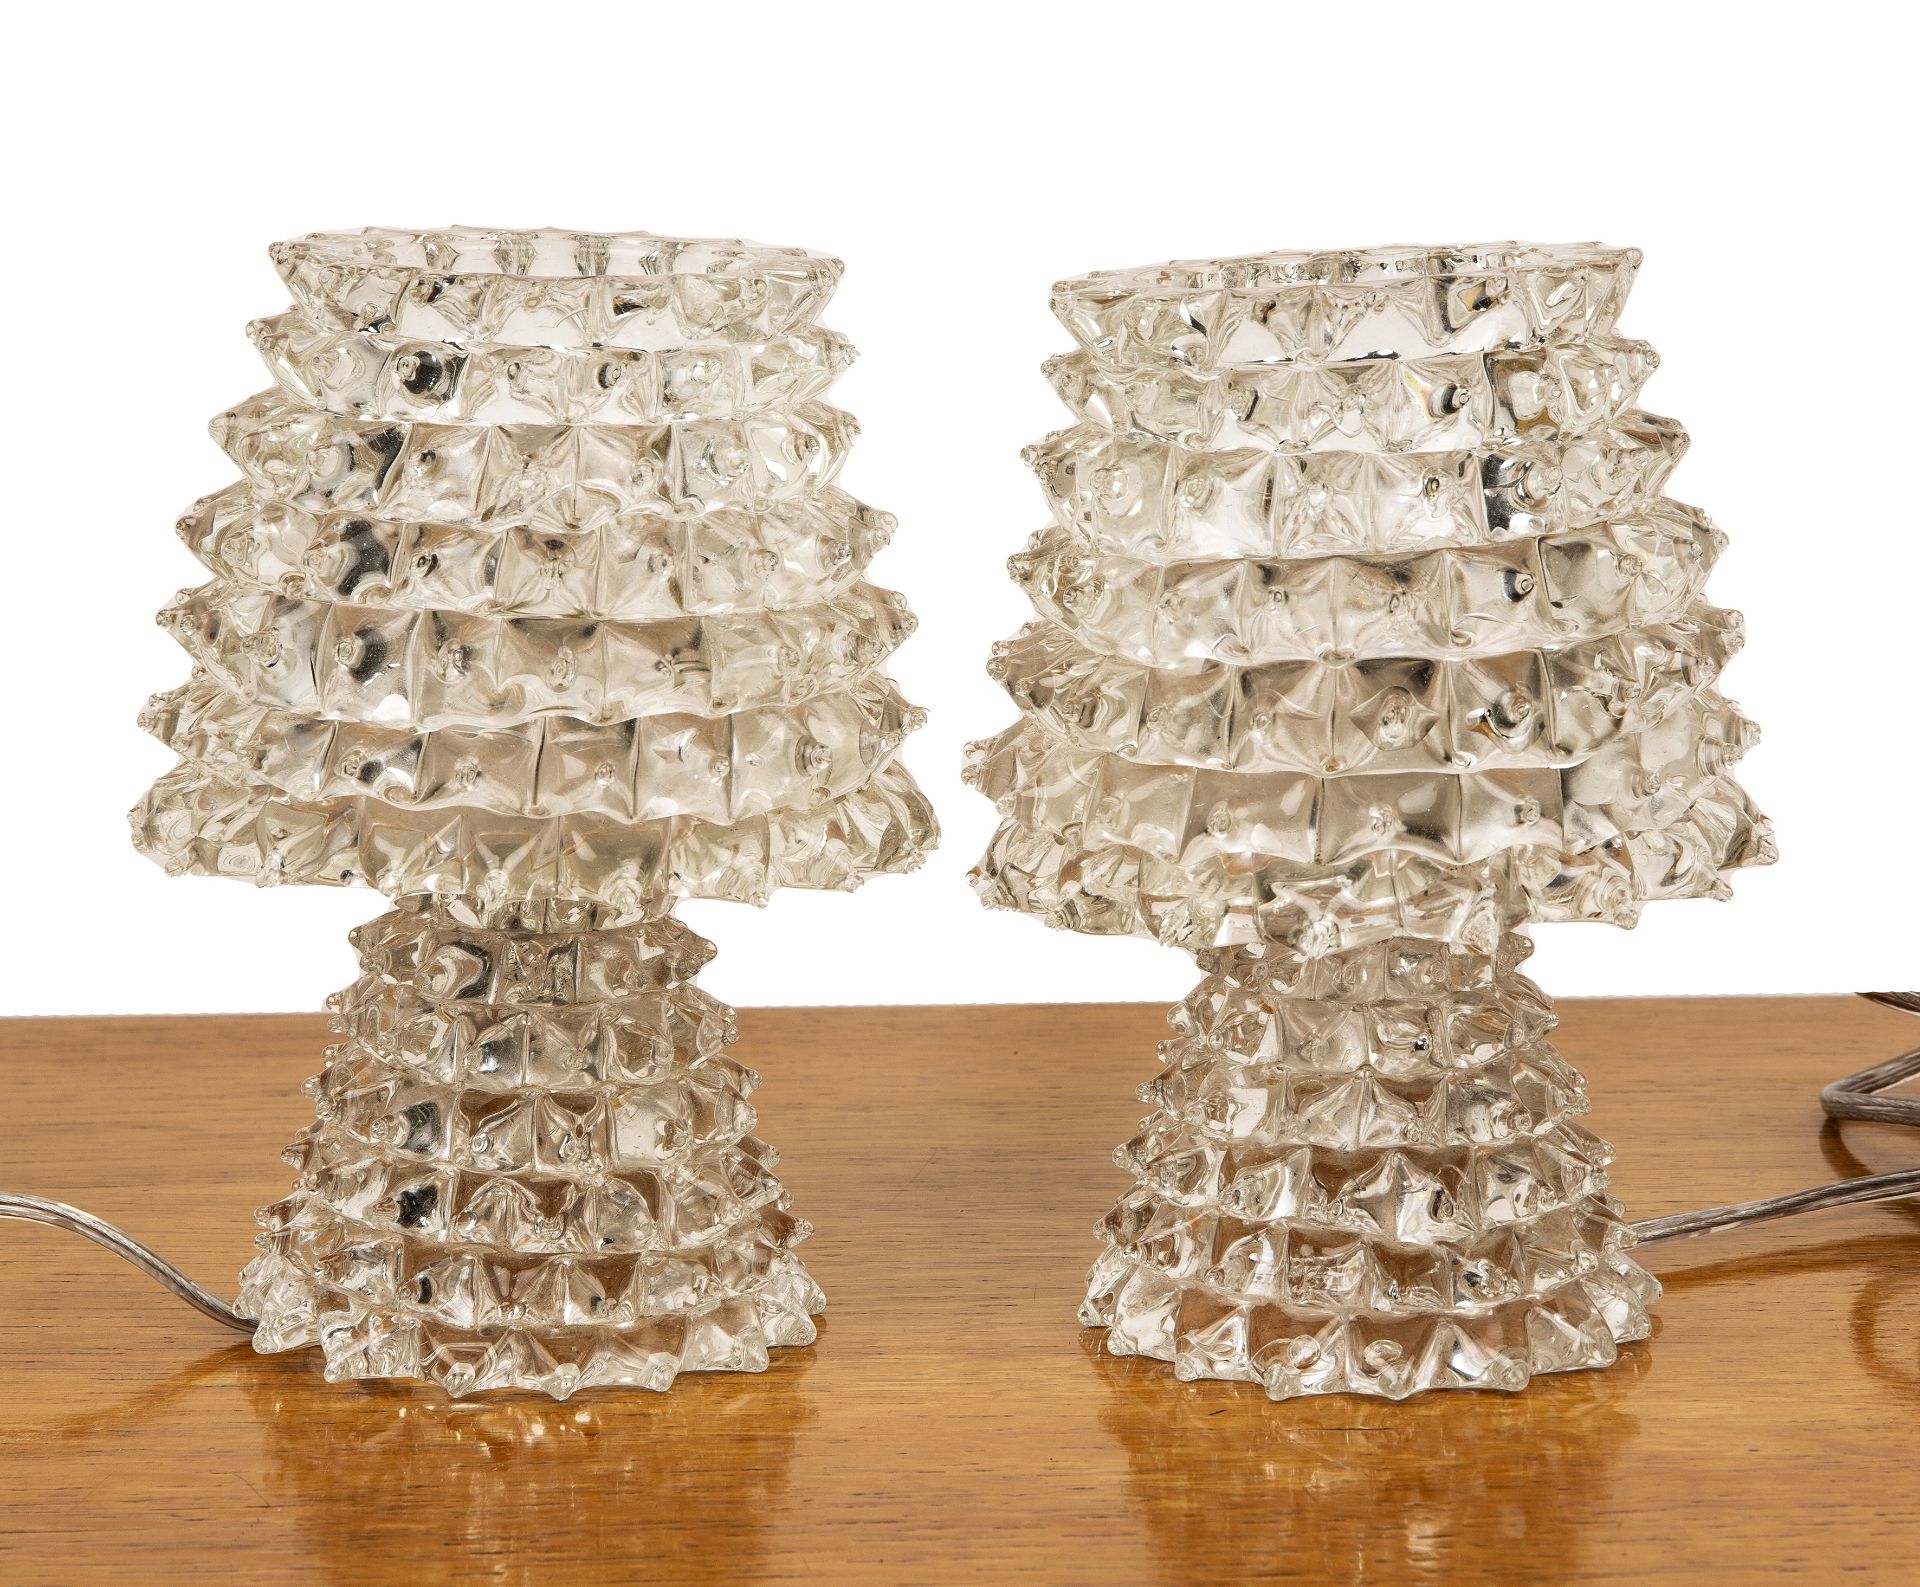 Barovier & Toso for Murano pair of 'Rostrato' style glass table lamps, 19cm high overall (2) One top